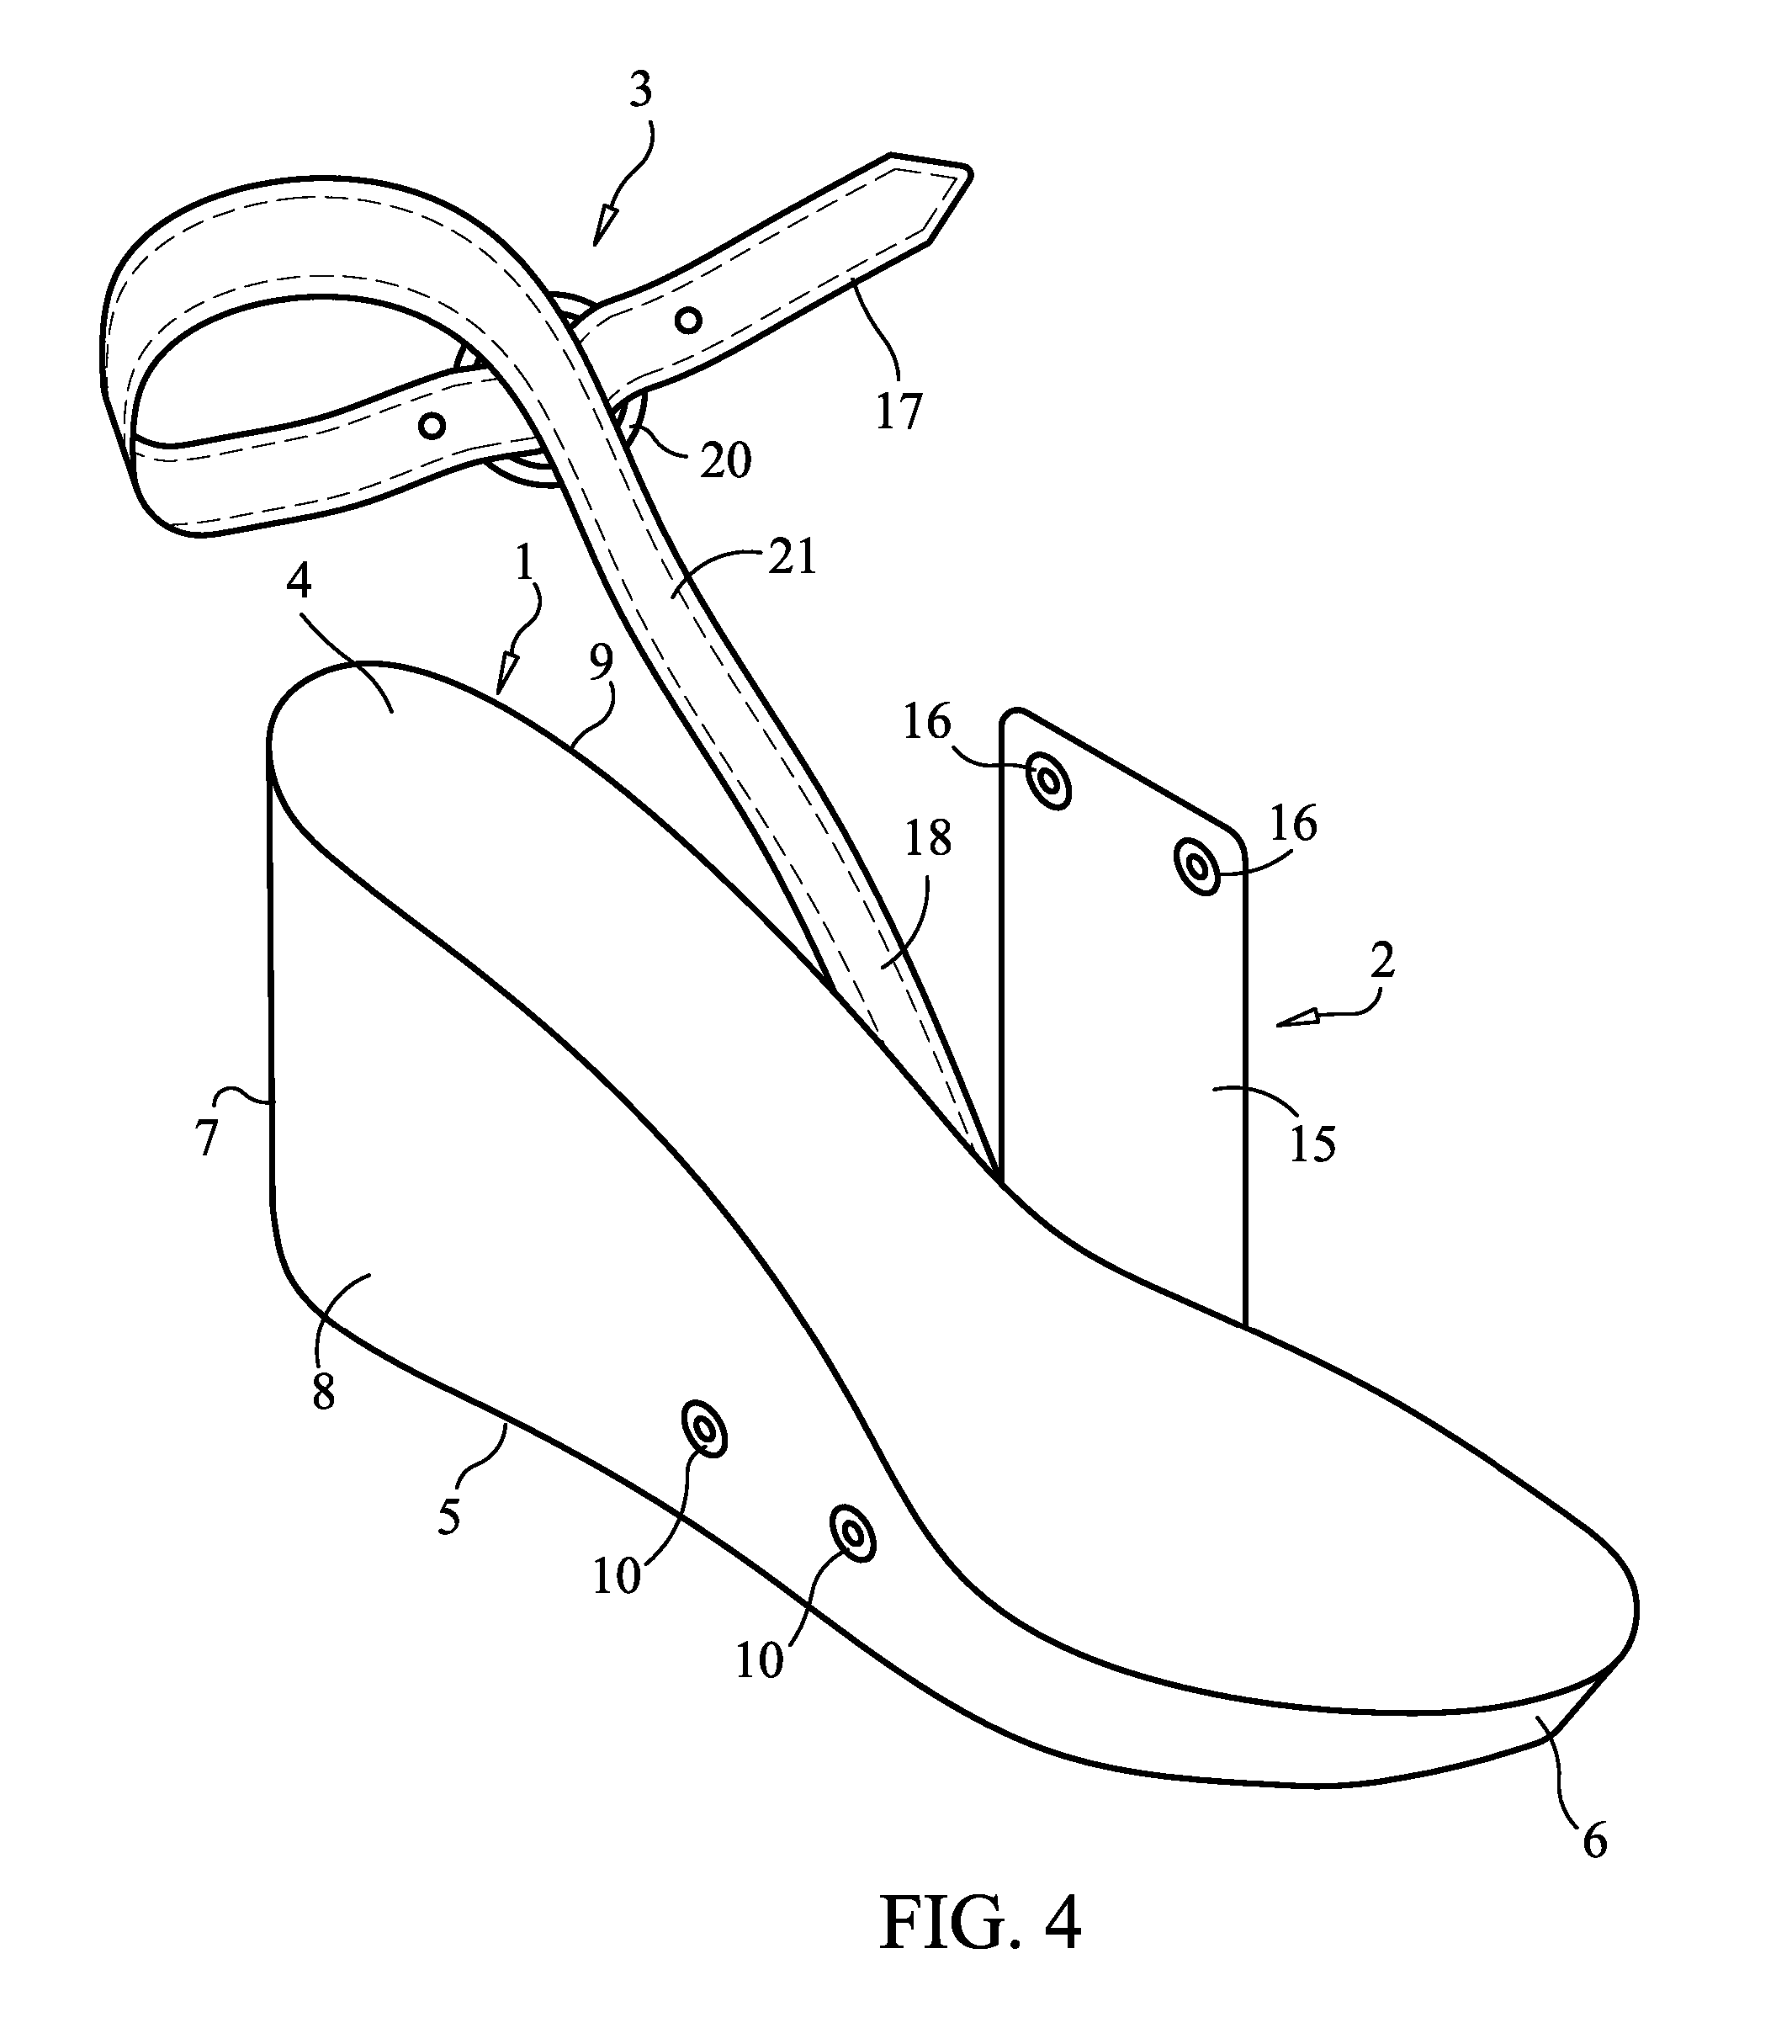 Interchangeable shoe-forming assembly